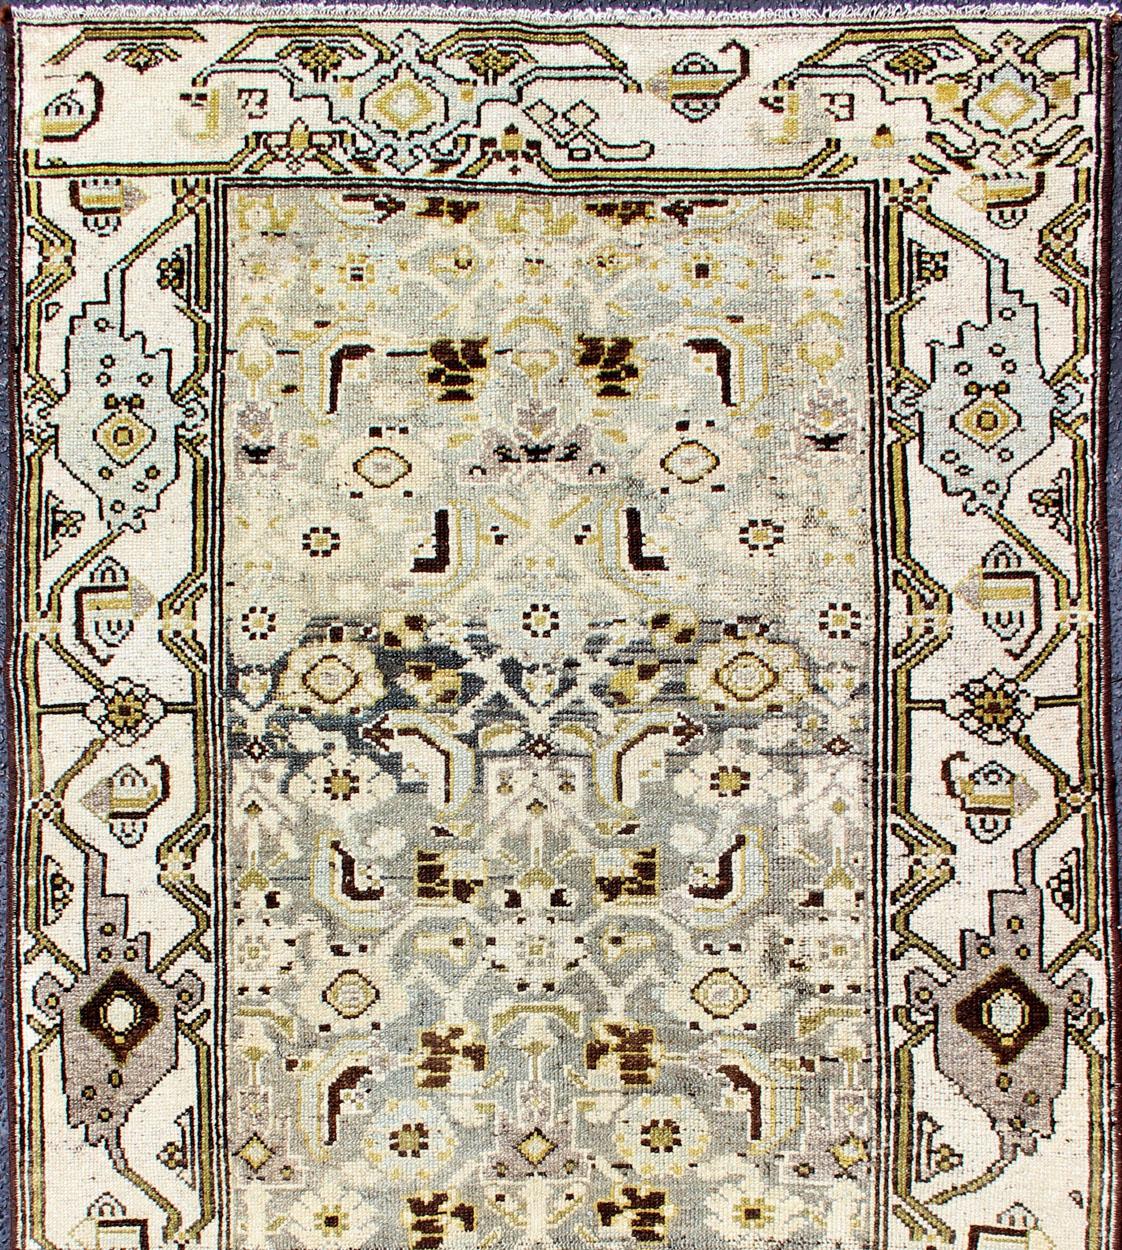 Antique Persian Malayer small rug, rug SUS-2009-676, country of origin / type: Iran / Malayer, circa 1910

This antique Persian Malayer rug, circa early 20th century, relies heavily on exquisite details as well as a repeat pattern of tribal Herati